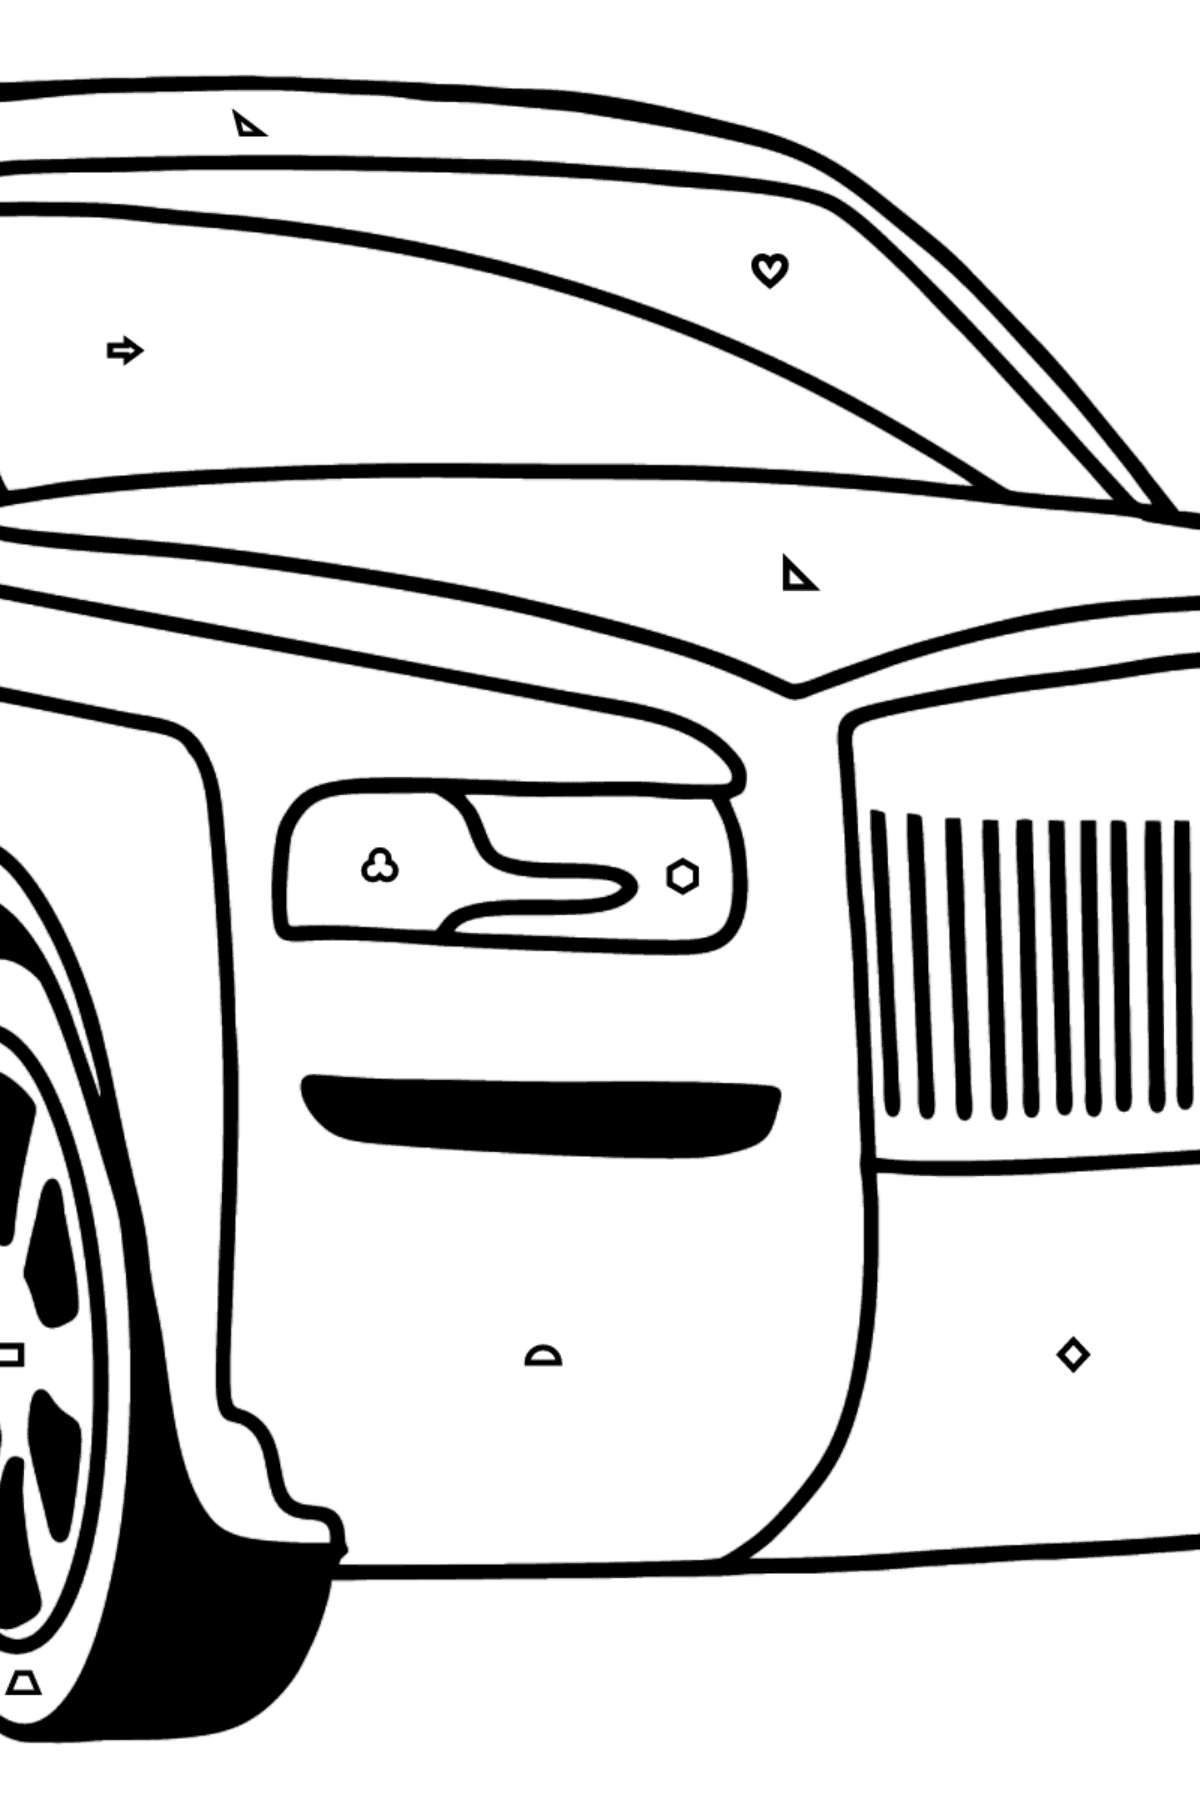 Rolls Royce Cullinan Car coloring page - Coloring by Geometric Shapes for Kids